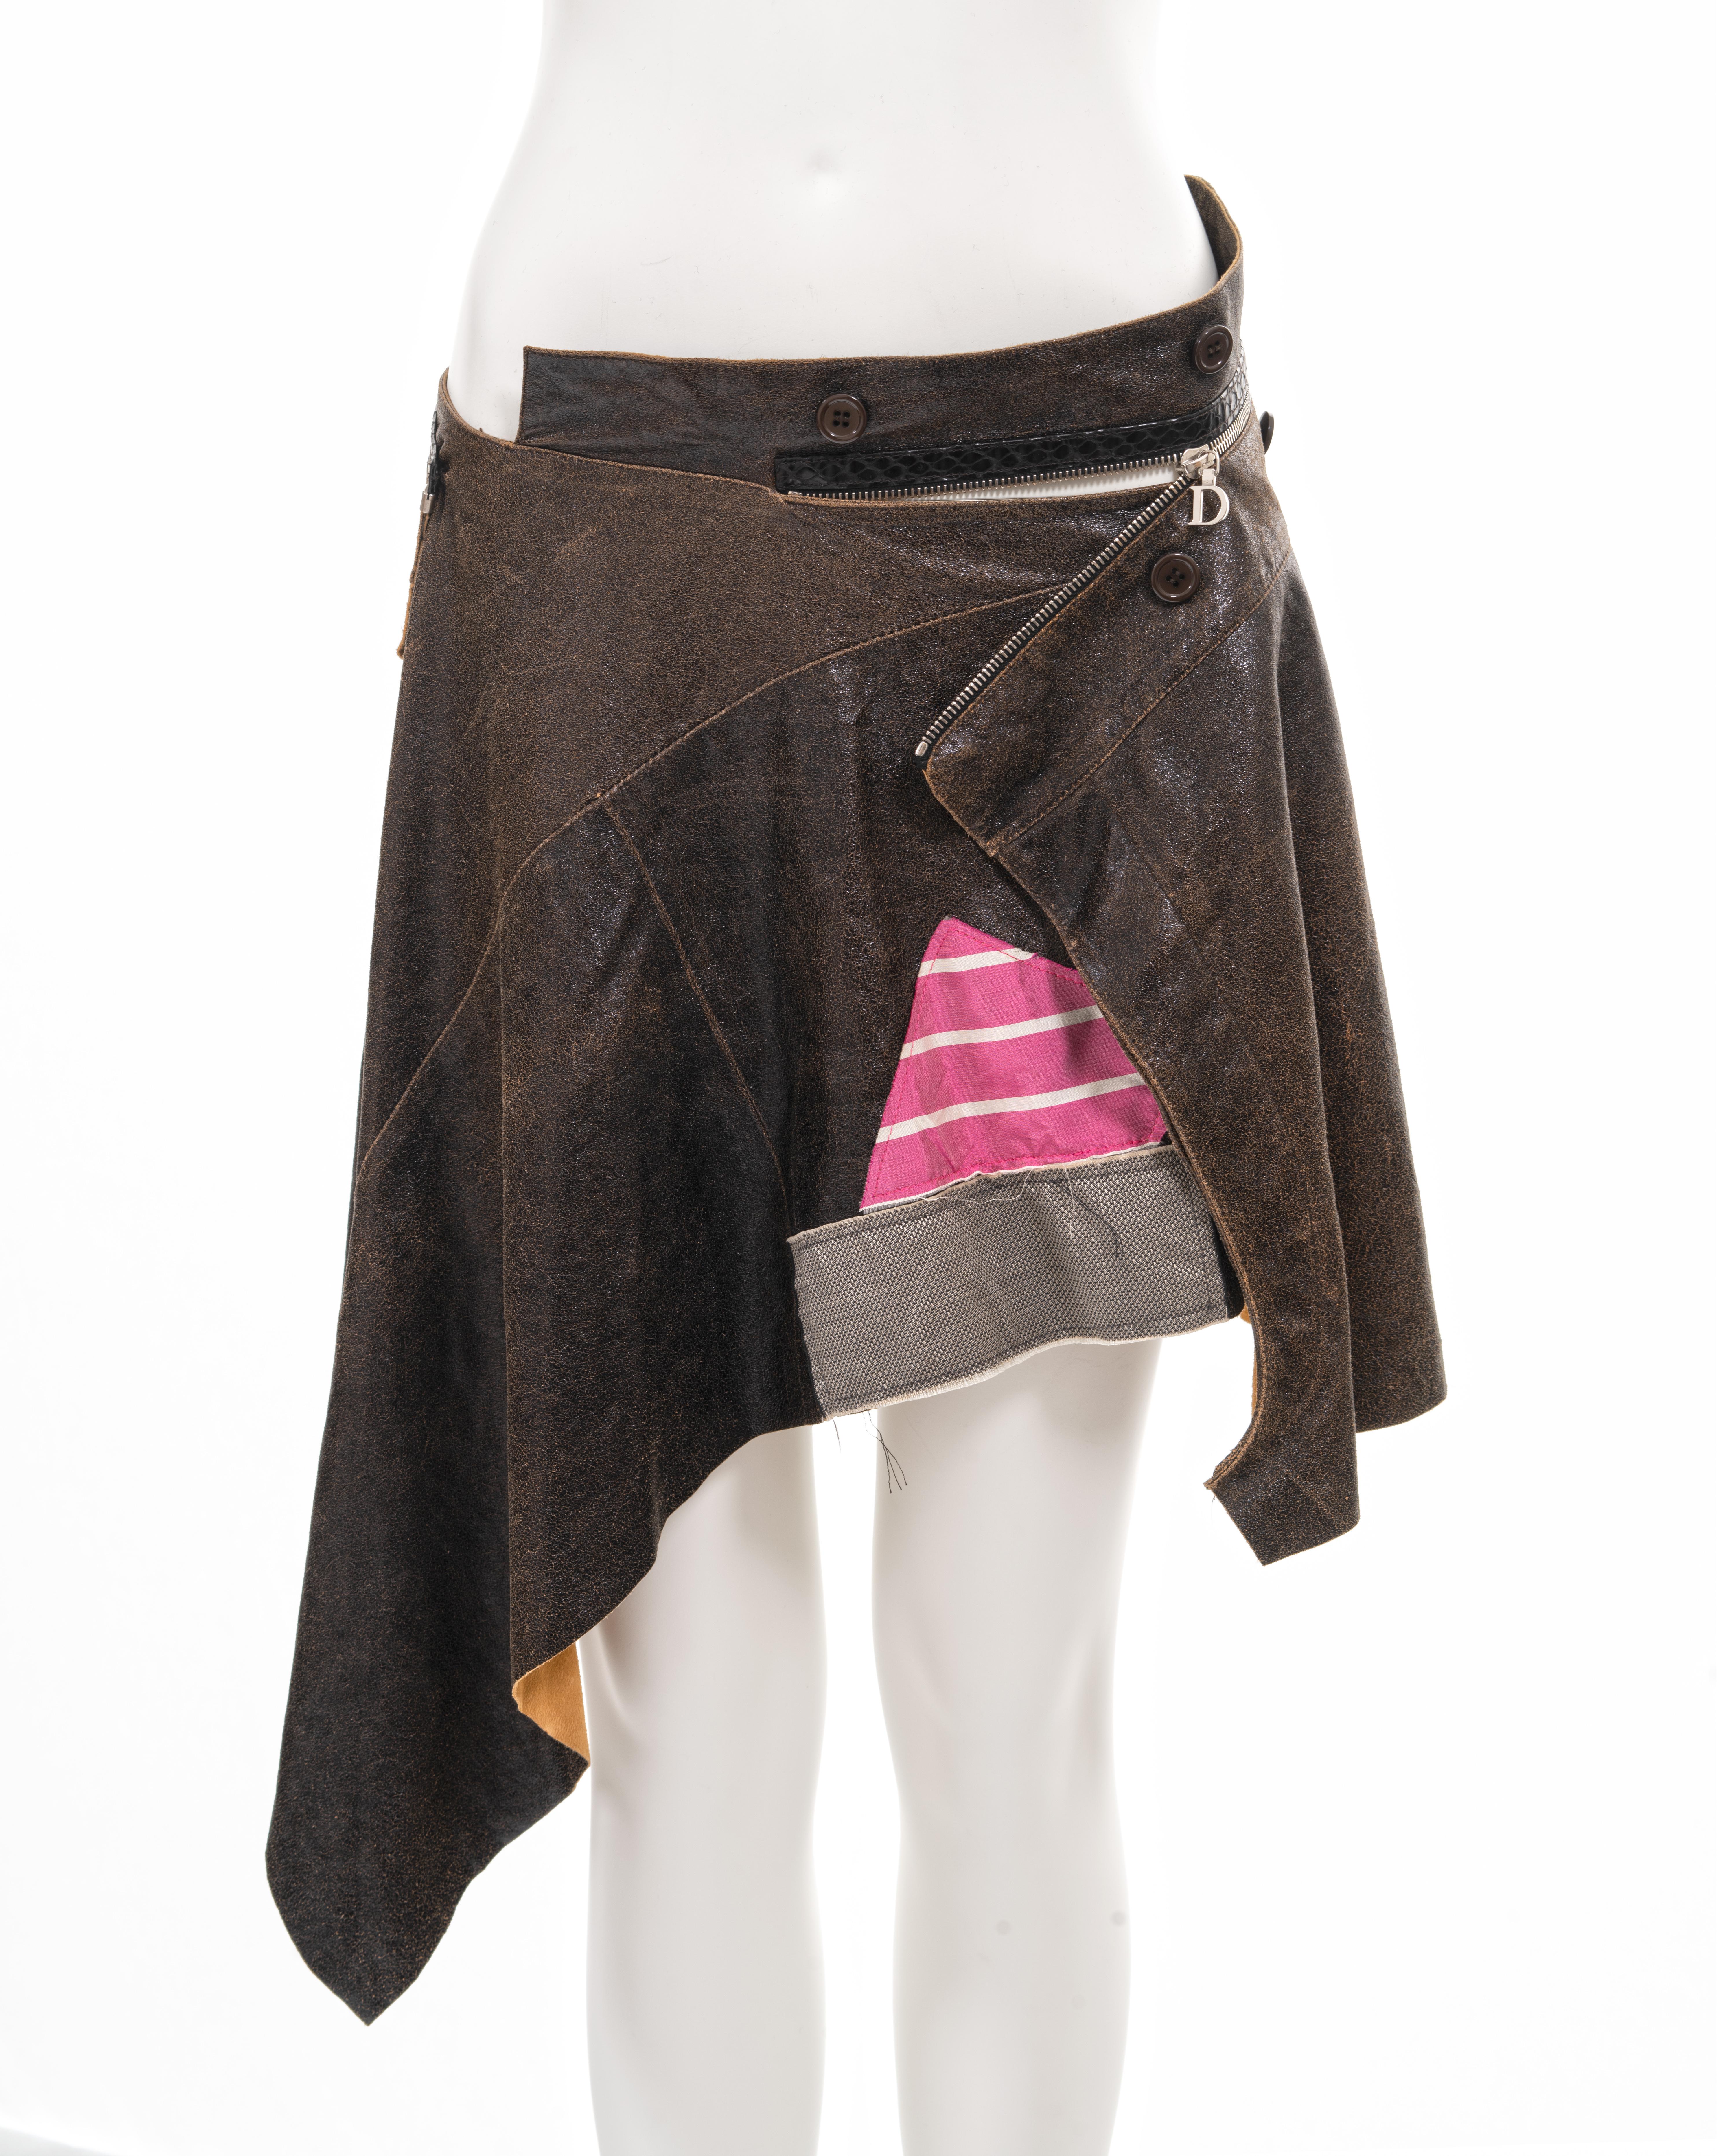 ▪ Christian Dior deconstructed leather wrap skirt 
▪ Creative Director: John Galliano
▪ Sold by One of a Kind Archive
▪ Spring-Summer 2001 
▪ Constructed from brown distressed leather 
▪ Convertible zipper with Dior 'D' zip pull 
▪ Black snakeskin